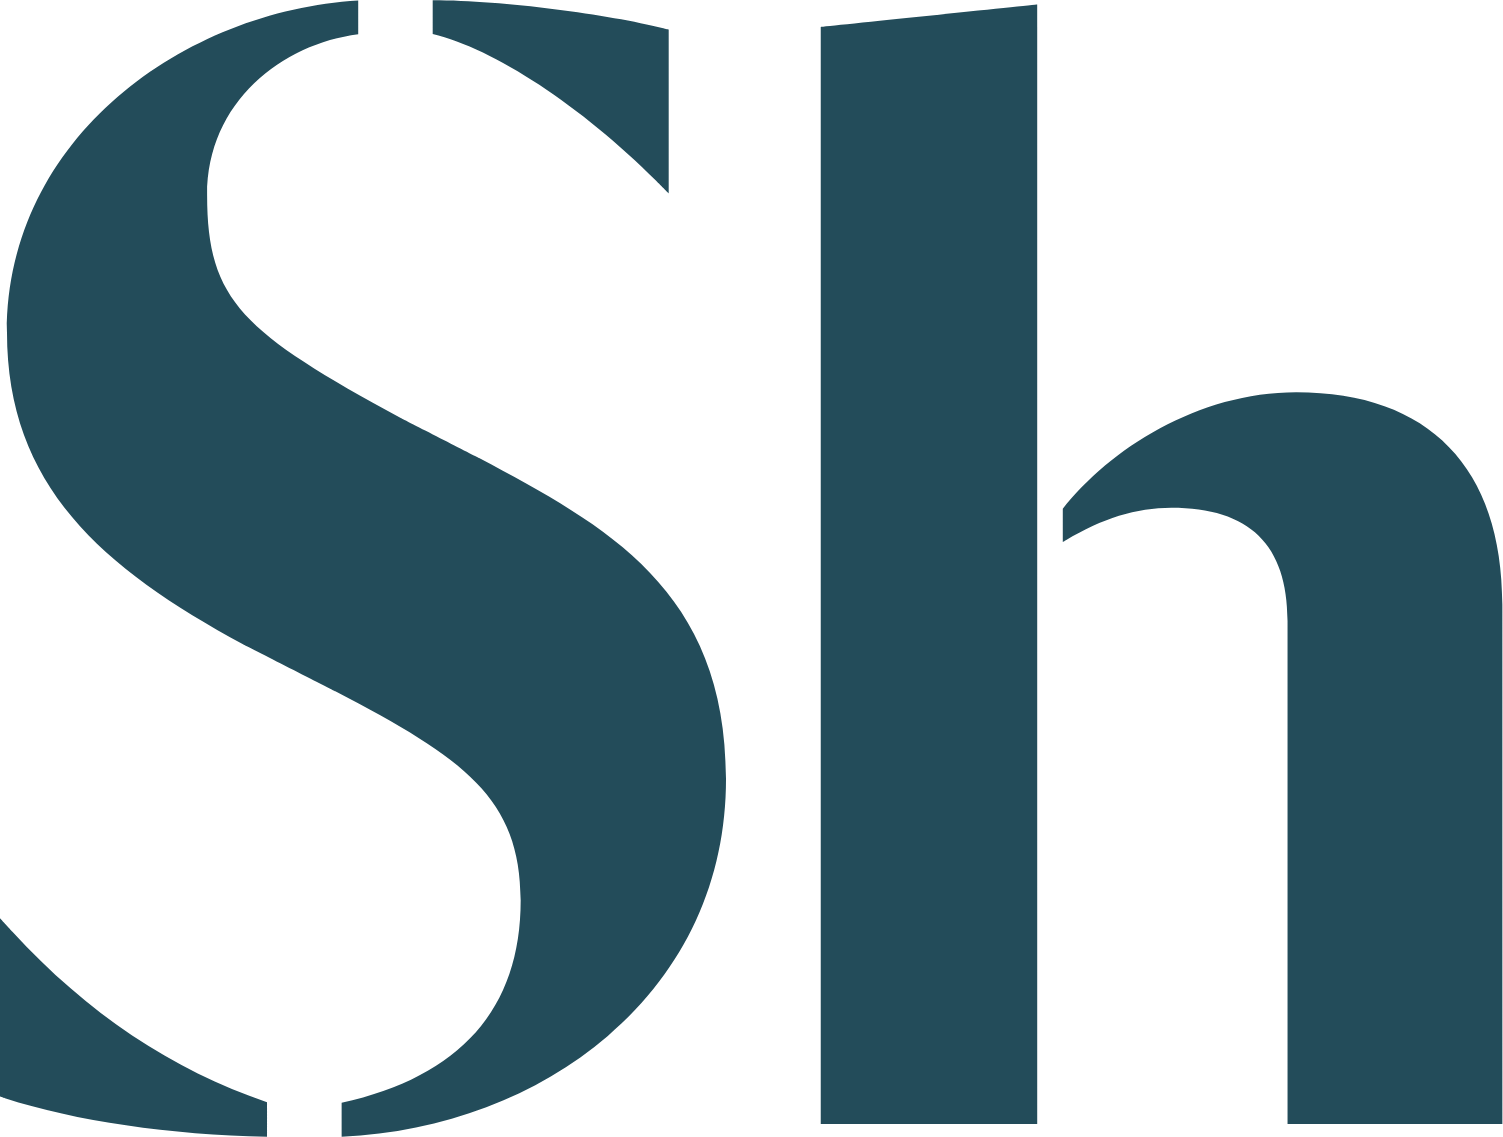 Shaftesbury logo in transparent PNG and vectorized SVG formats